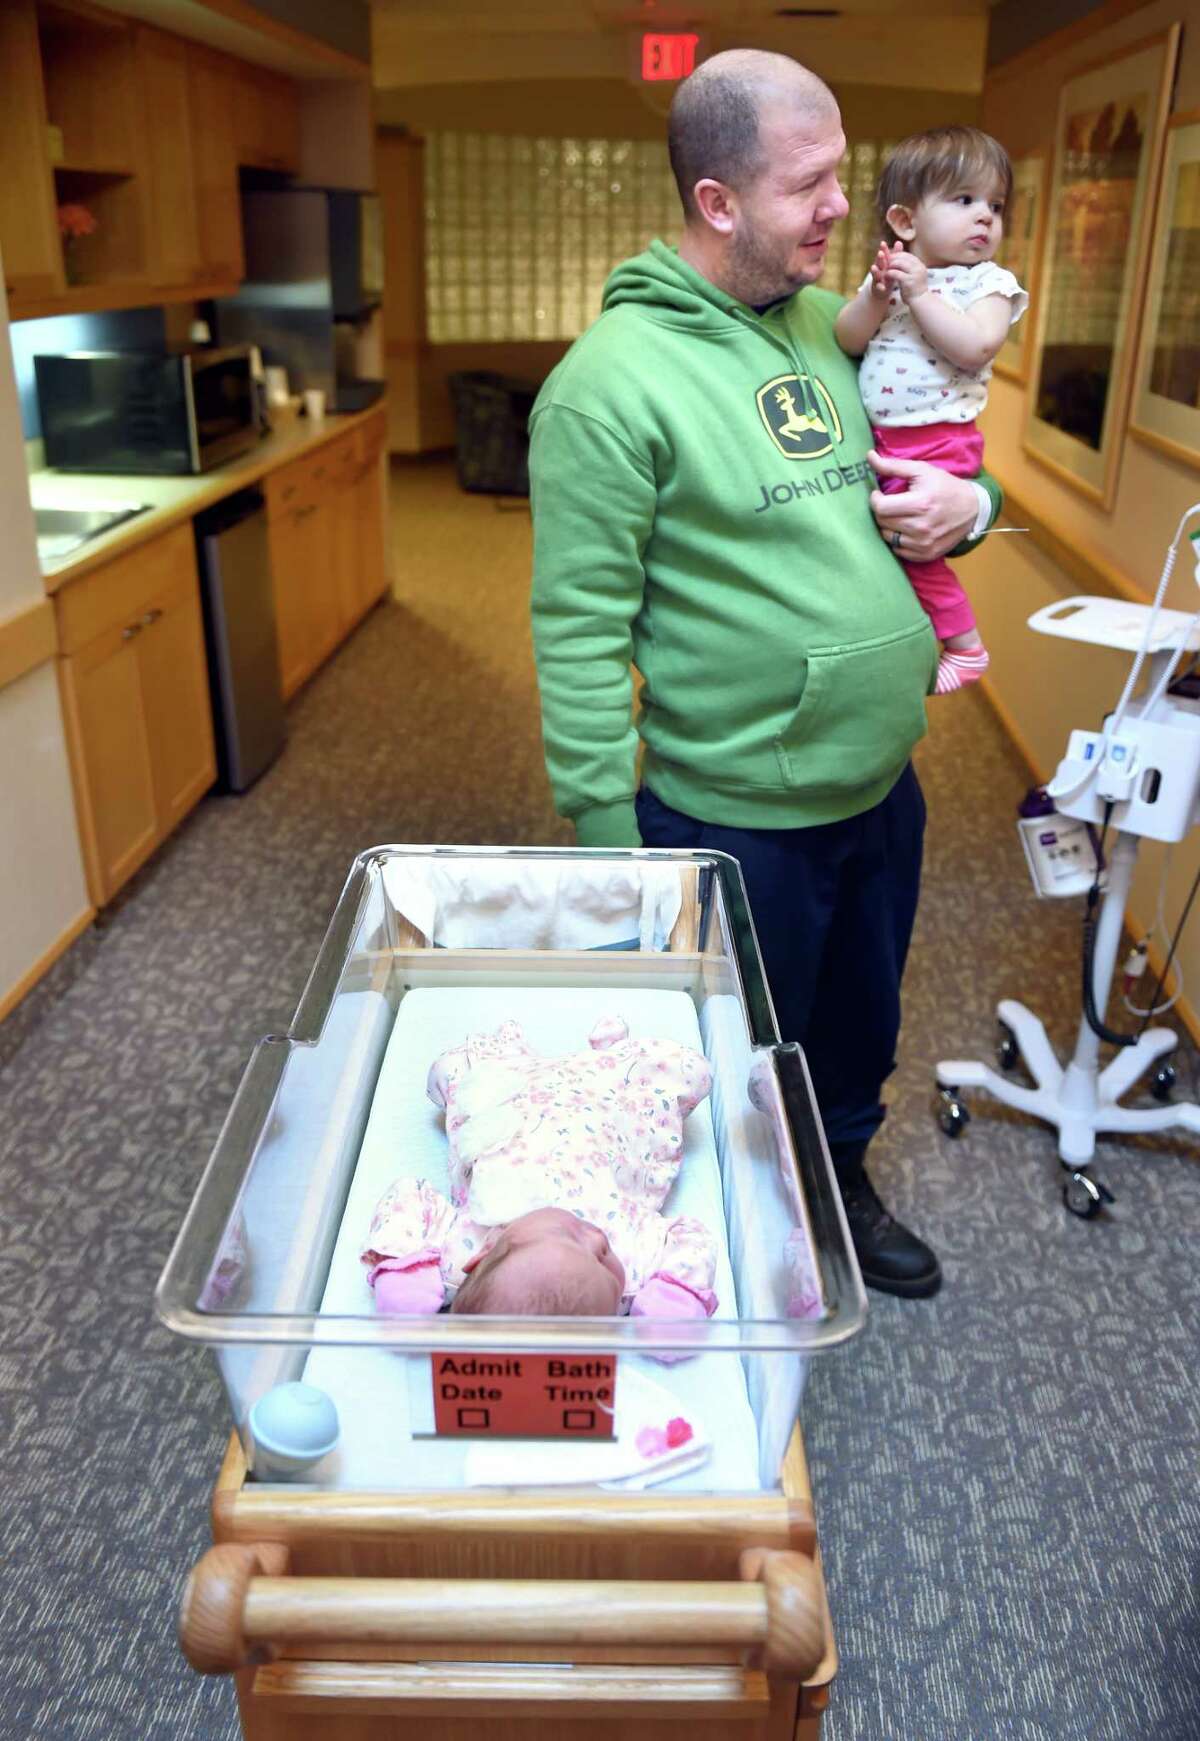 Dave Venice of Woodbridge pushes his newborn daughter, Arabella, who was born at 12:04 a.m. on New Year's Day January 1, 2020, to the Family Room at the Childbirth Center at Griffin Hospital in Derby while carrying his other daughter, Emerie, 1. Arabella weighs 8 lb. 6 oz. and is 20.5 inches.